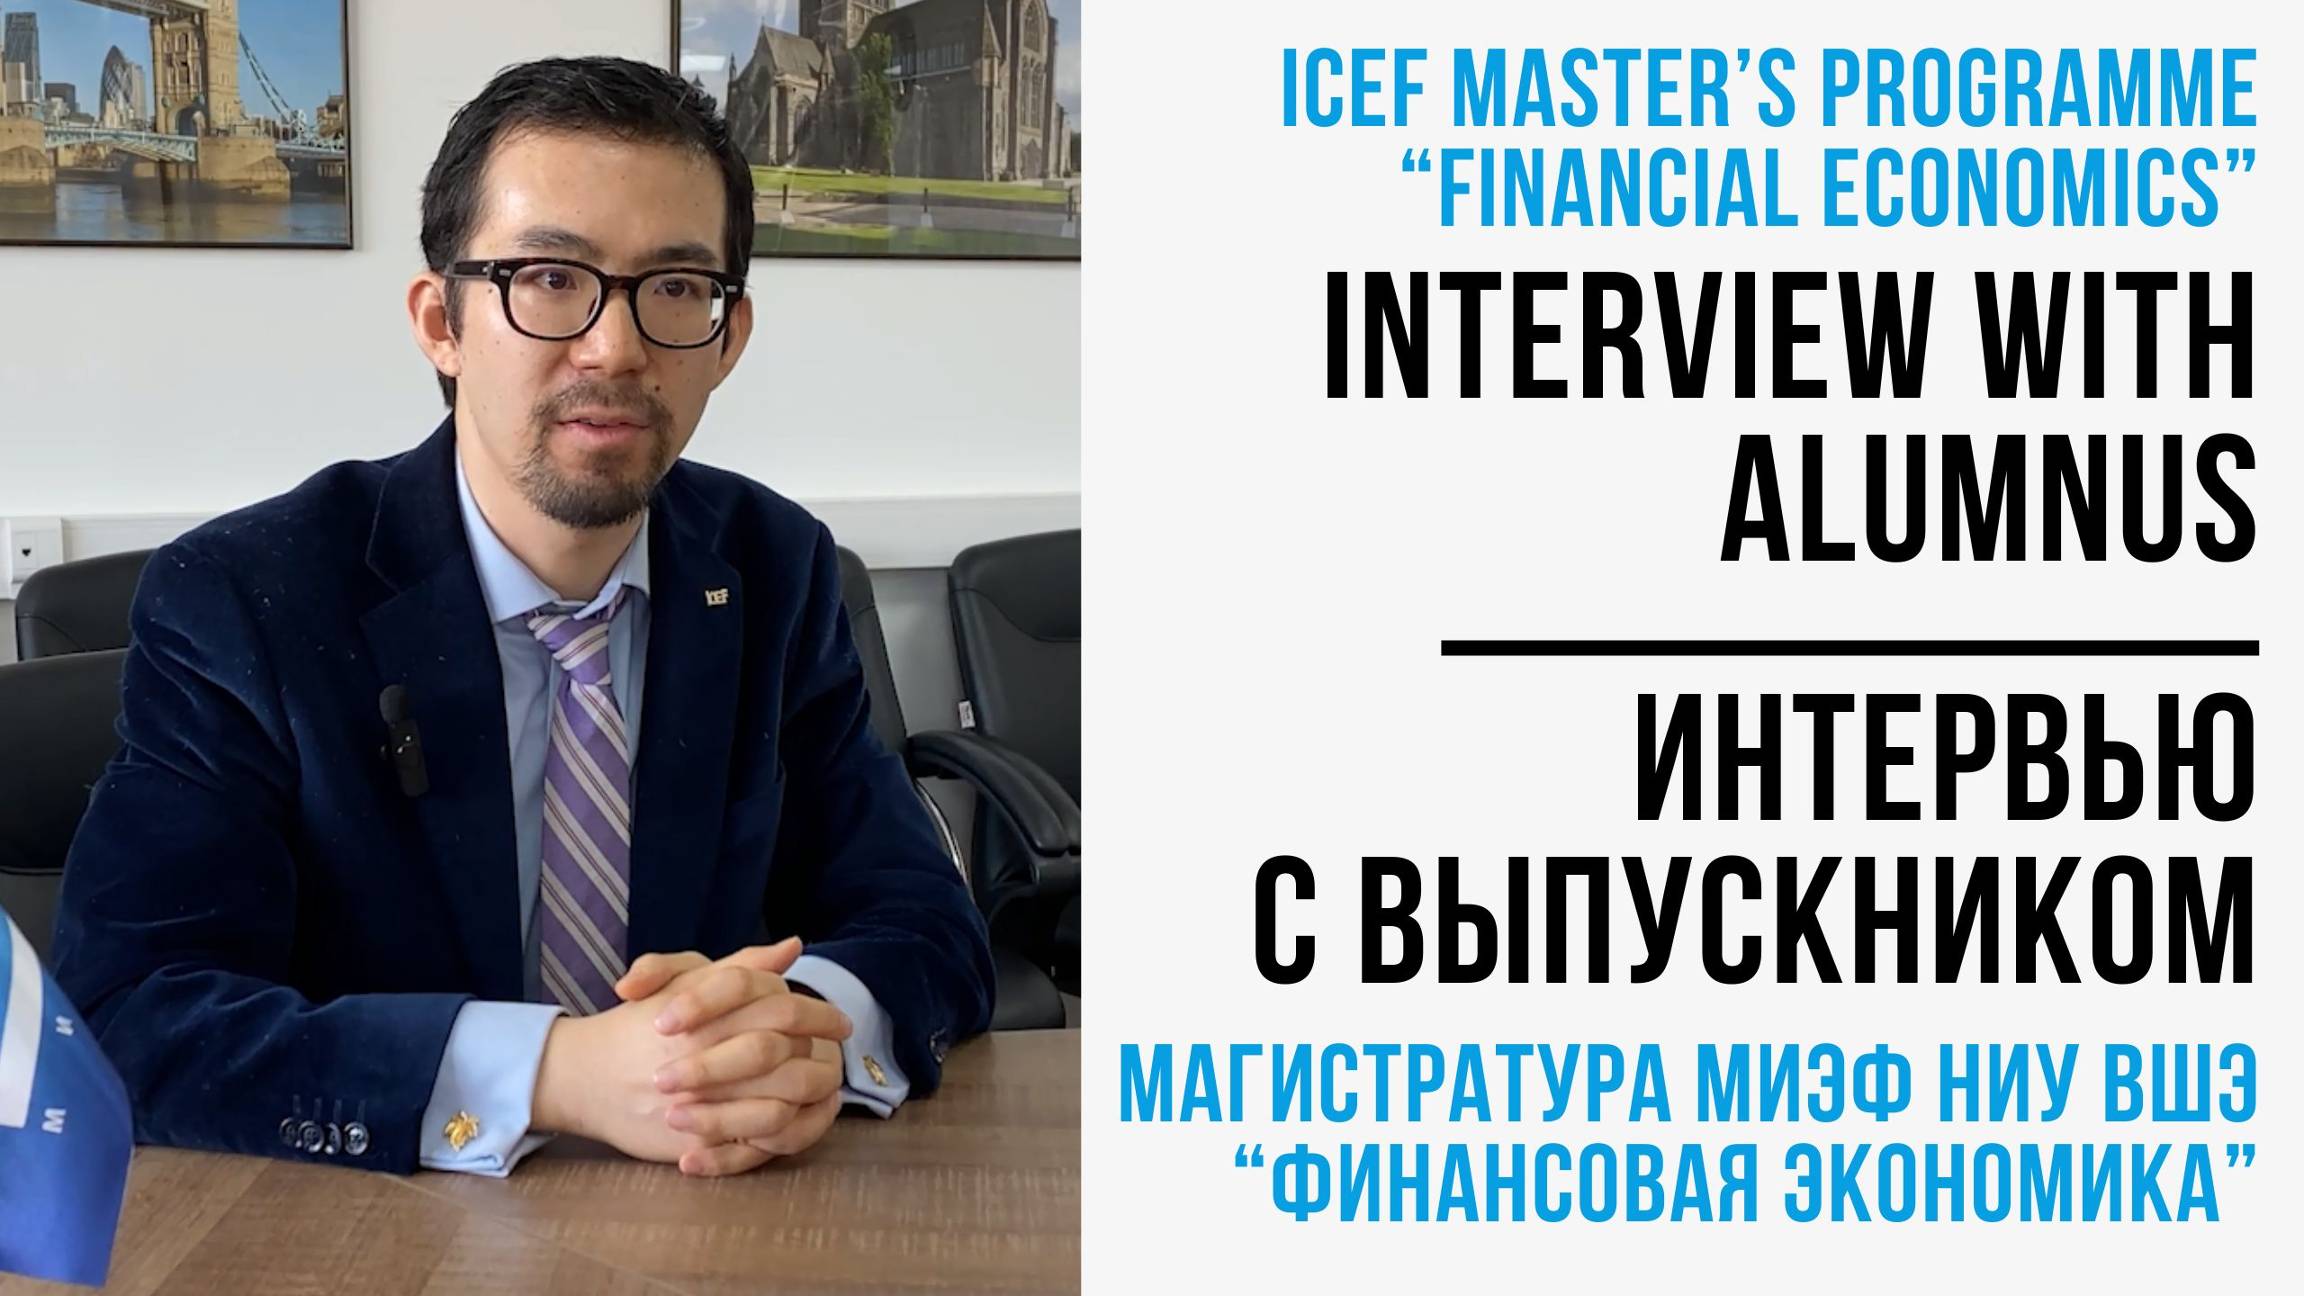 Interview with Lin Yang, ICEF Master’s Programme “Financial Economics” Alumnus 2015